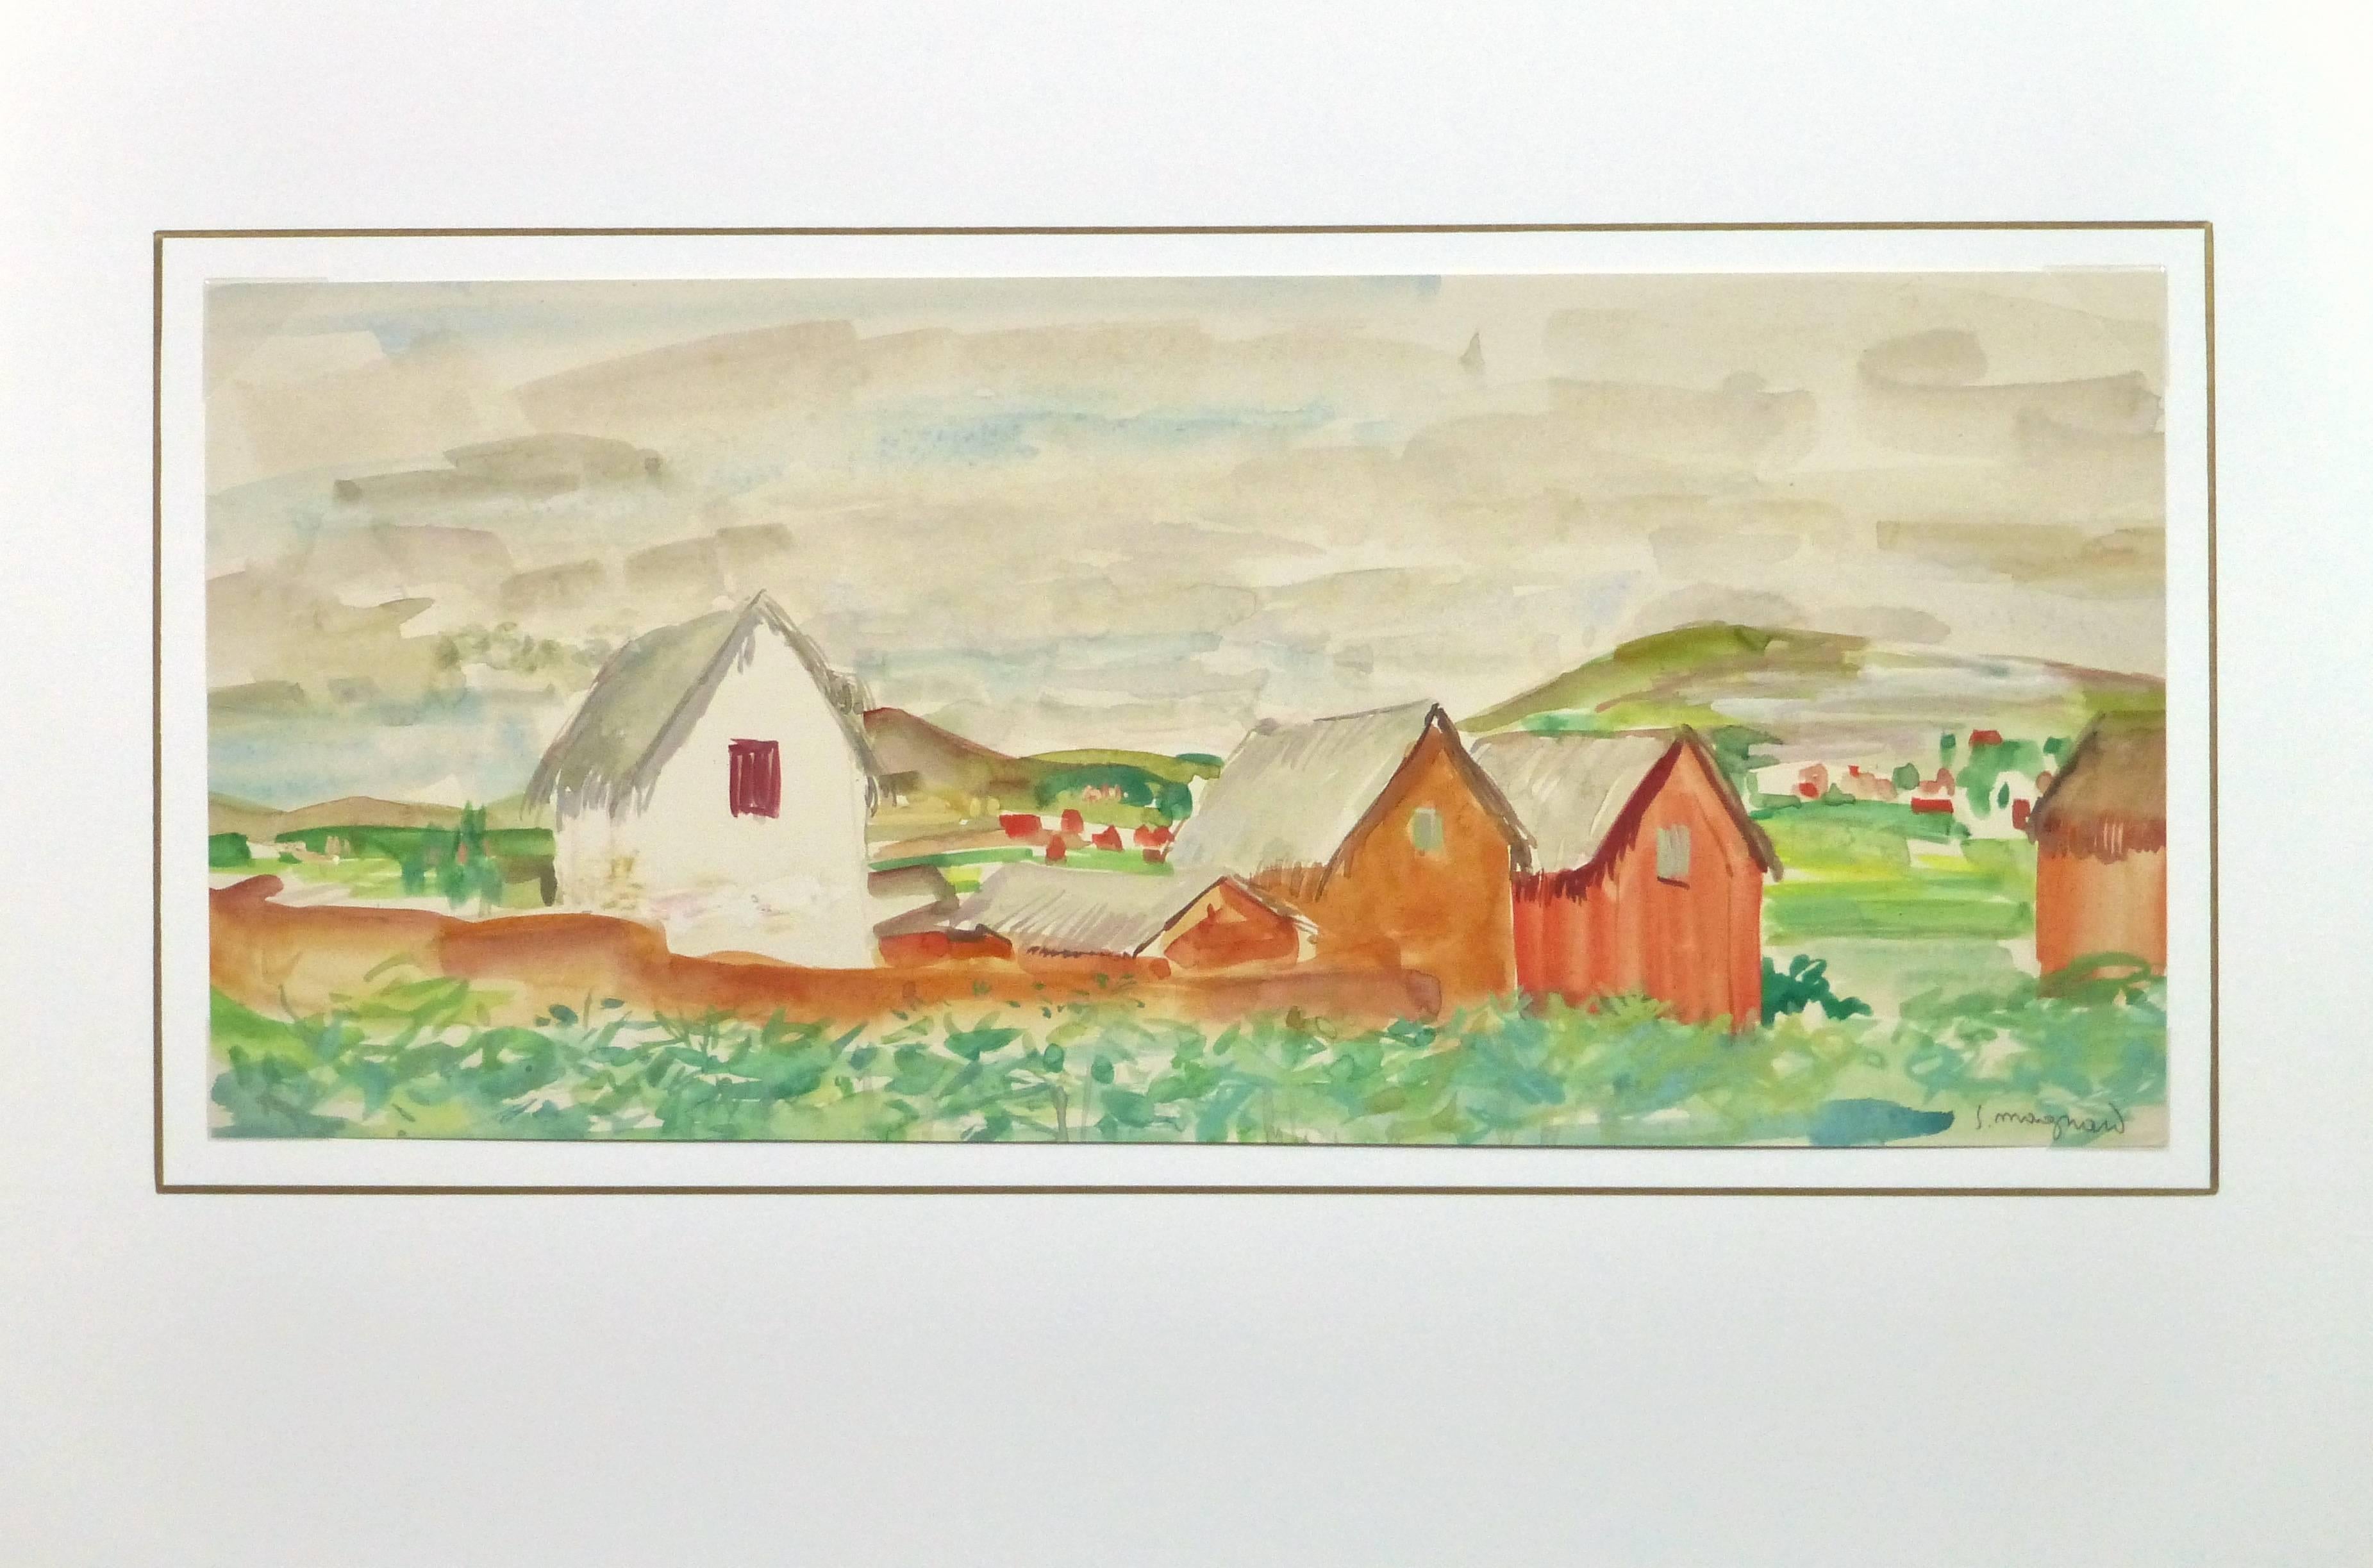 Warmly hued watercolor of rust colored homes and buildings dotting a rural landscape by French artist Stephane Magnard, circa 1950. Signé en bas à droite.

Stéphane Magnard was the painter for the colonial governor of Madagascar from 1950-1953. His